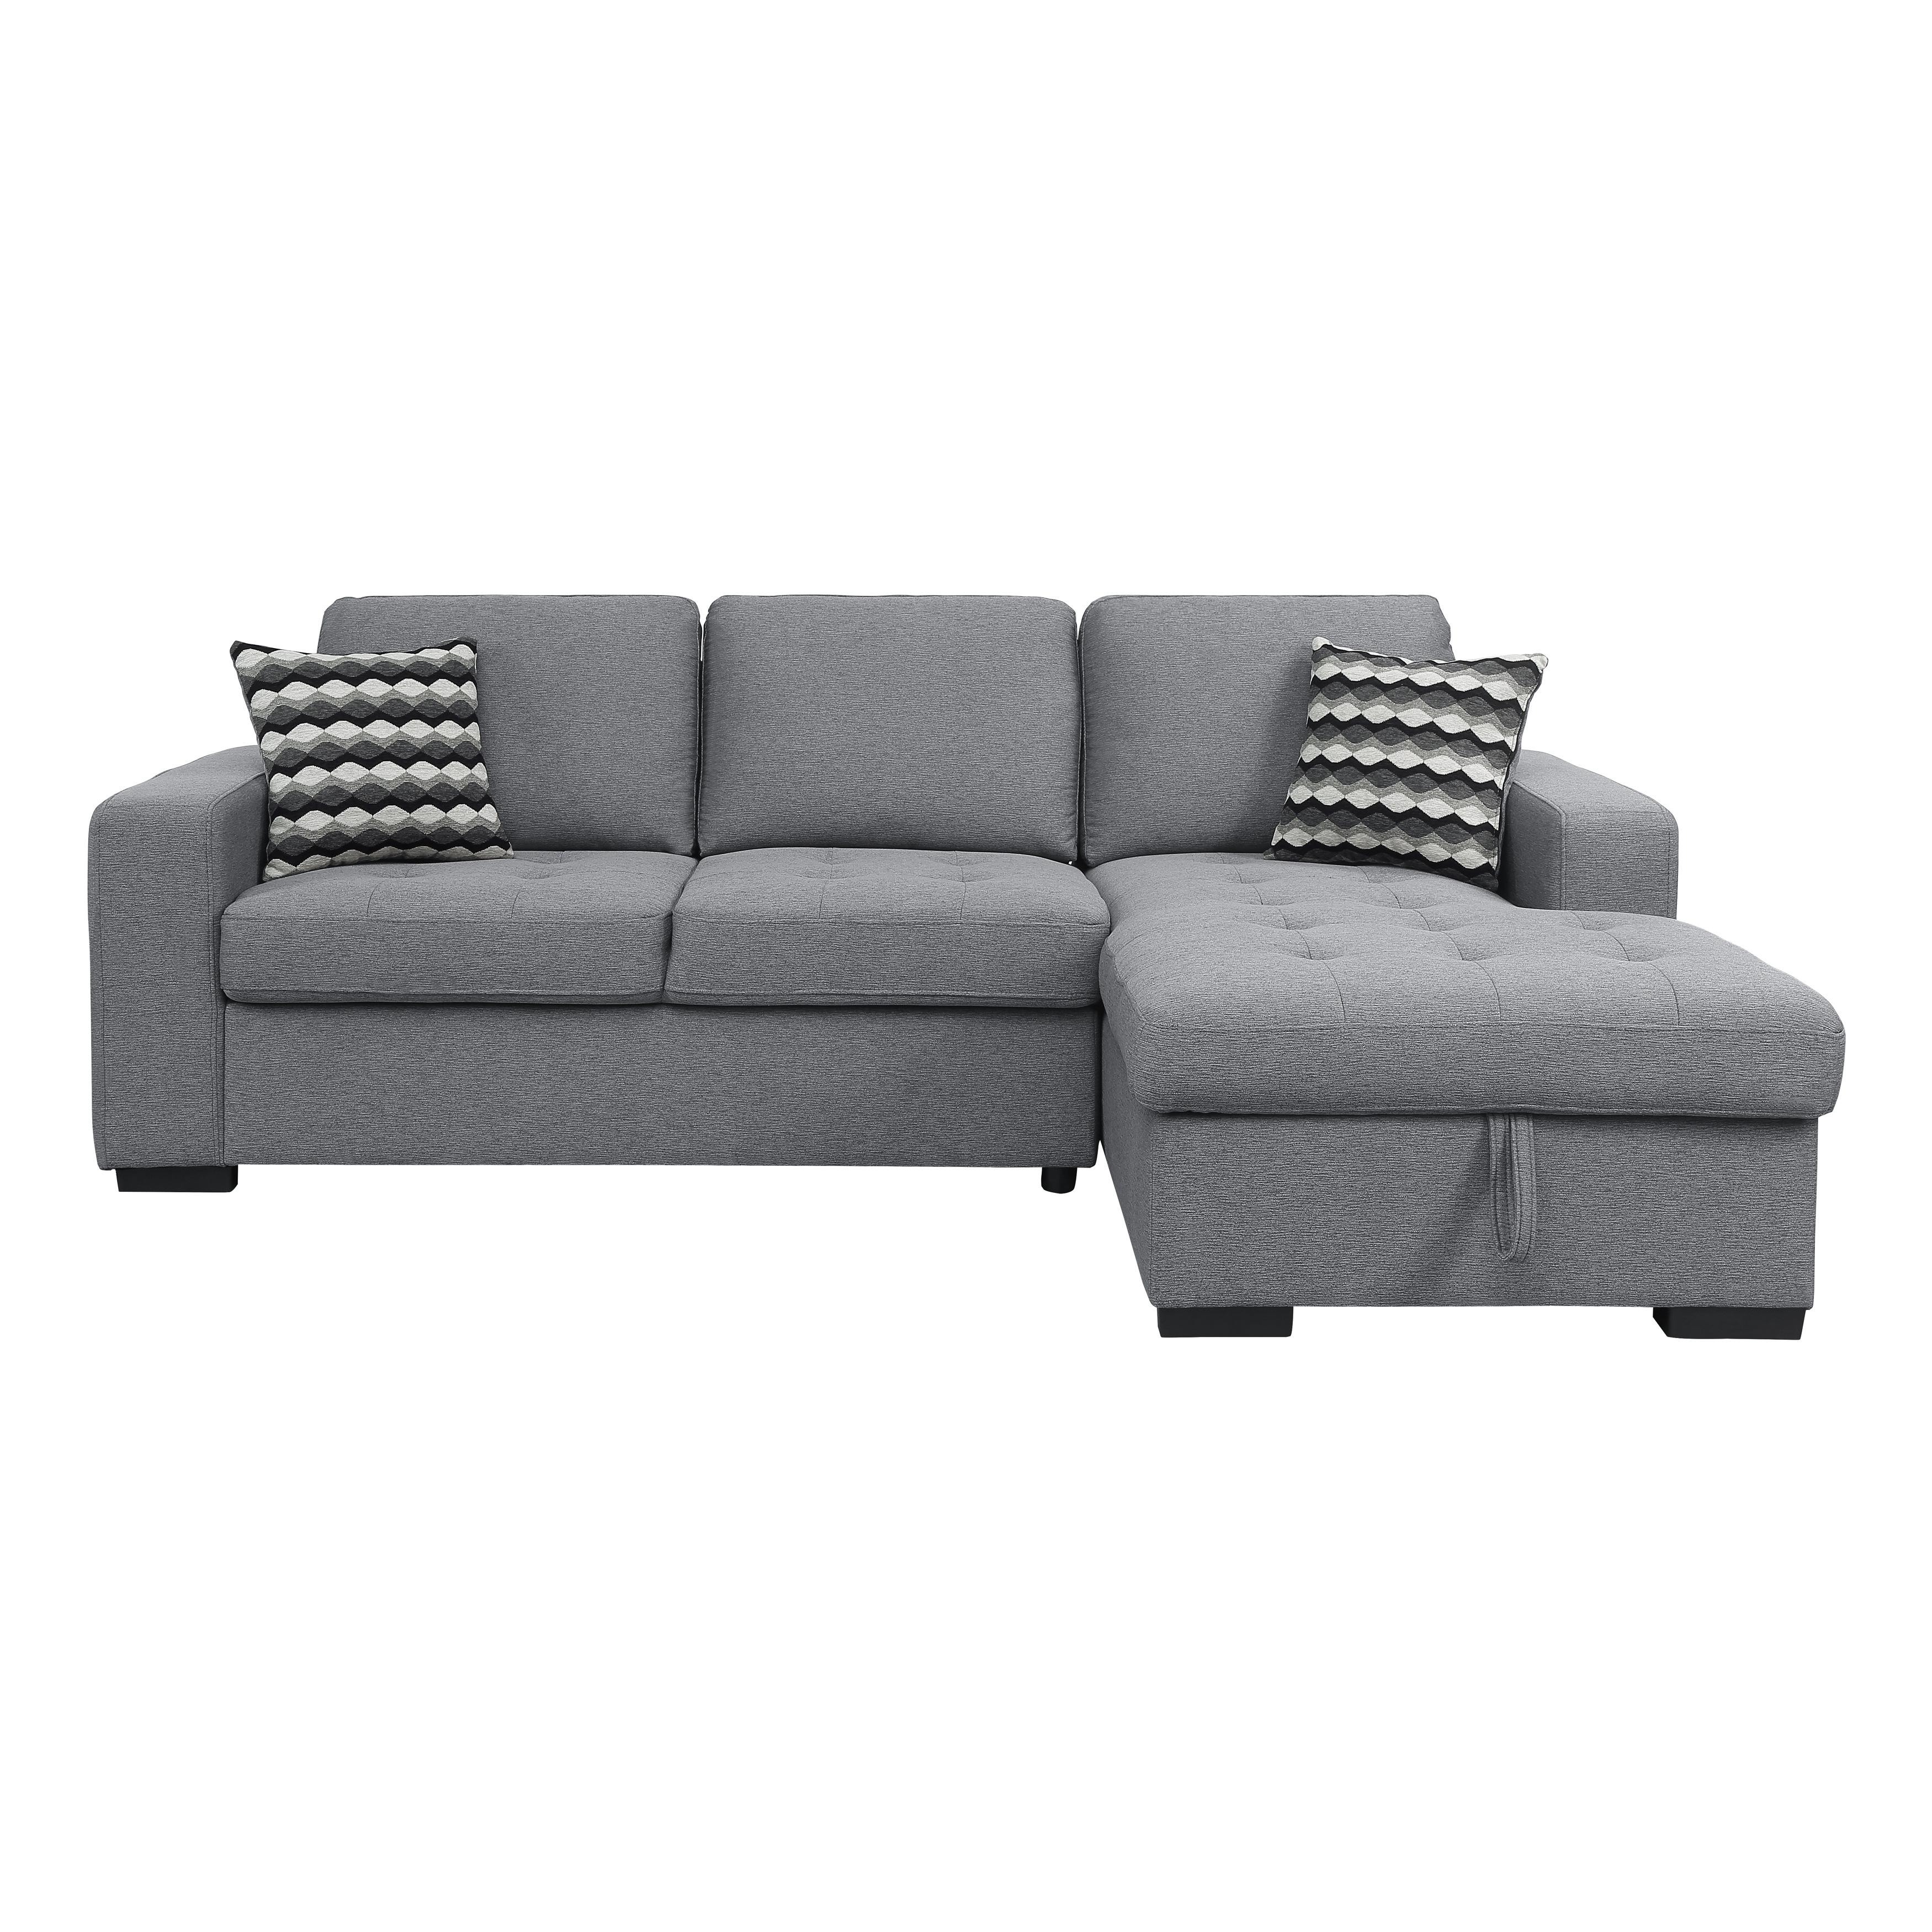 Transitional Sectional 9313GY*22LRC Solomon 9313GY*22LRC in Gray 